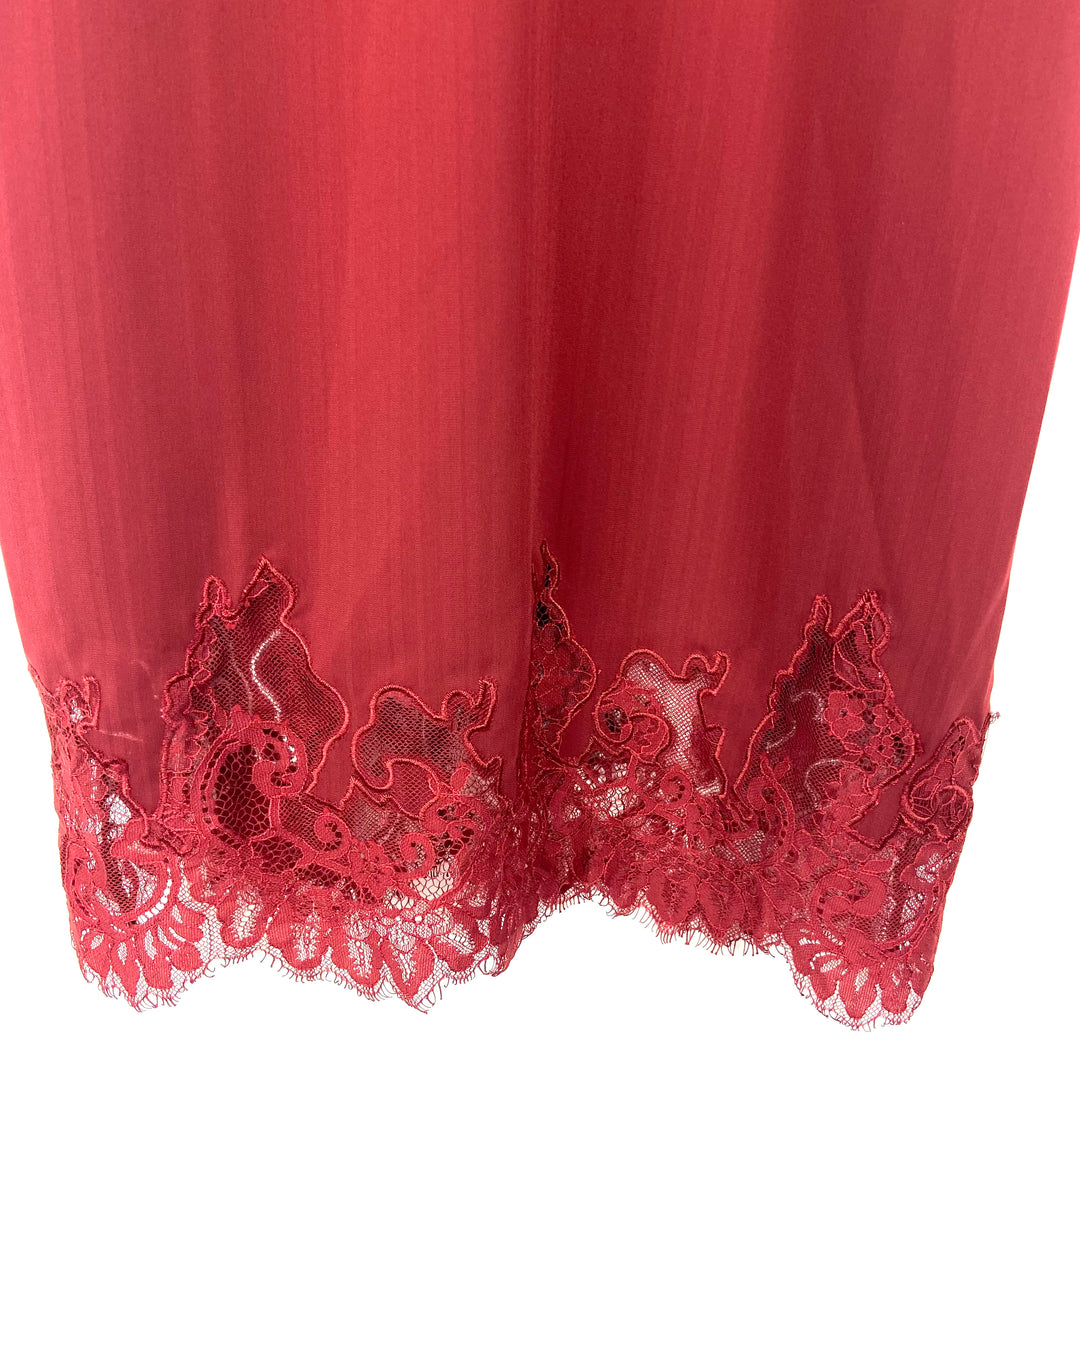 Red Lace Slip Dress - Small